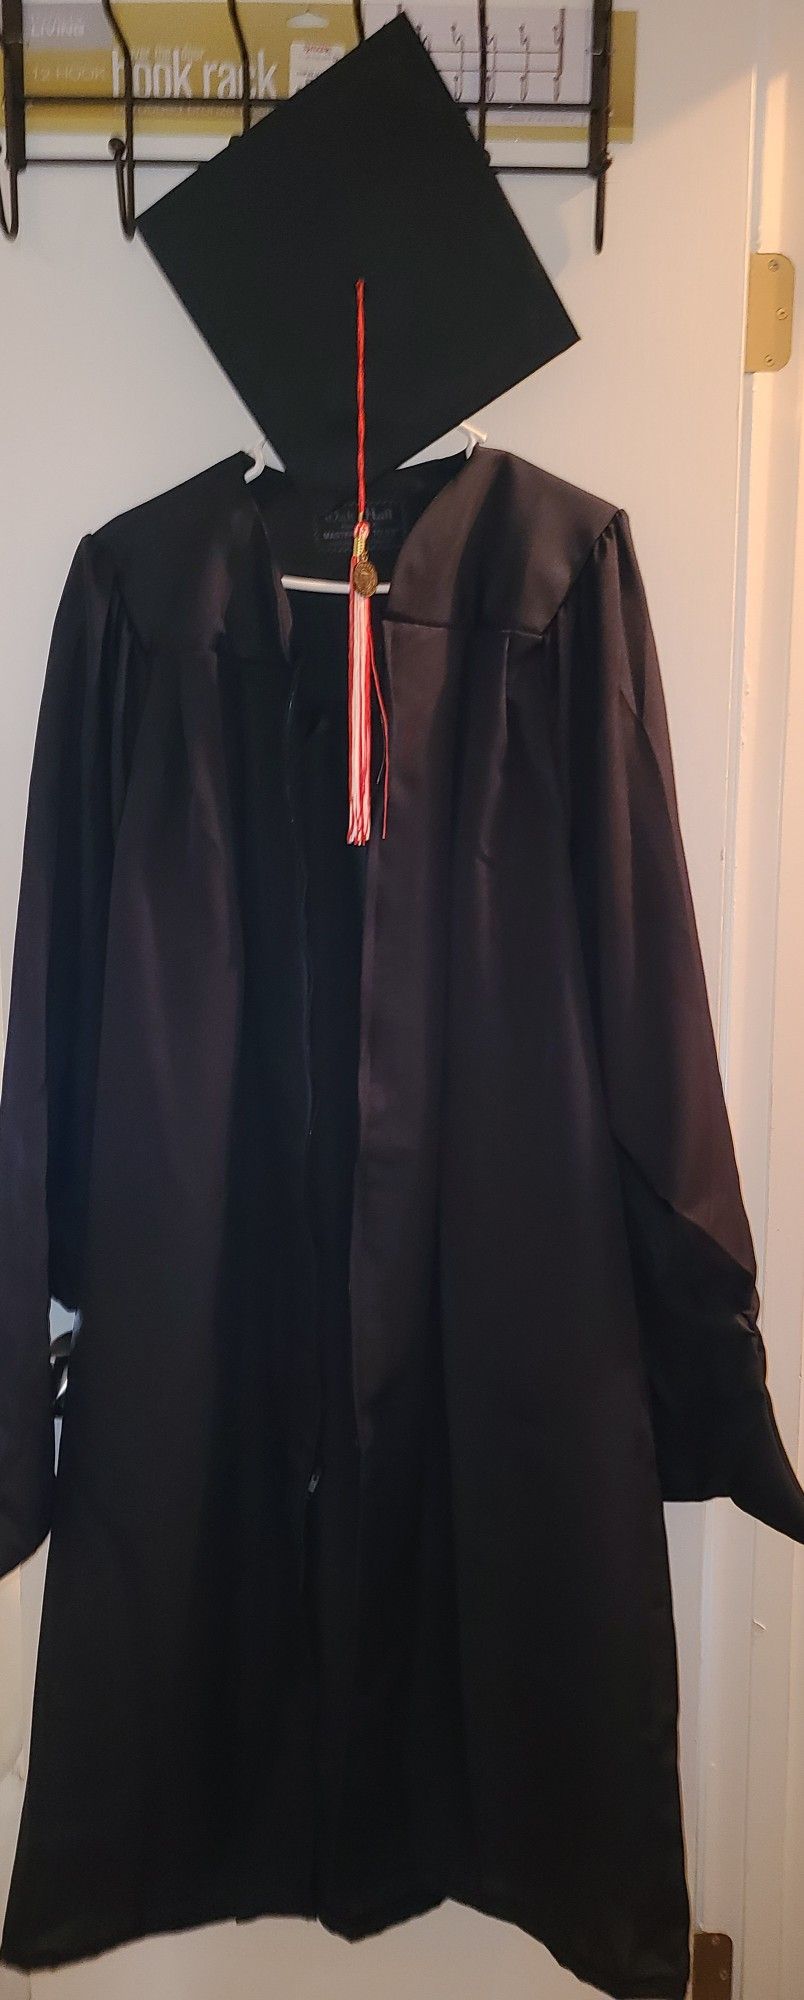 Masters Cap And Gown 